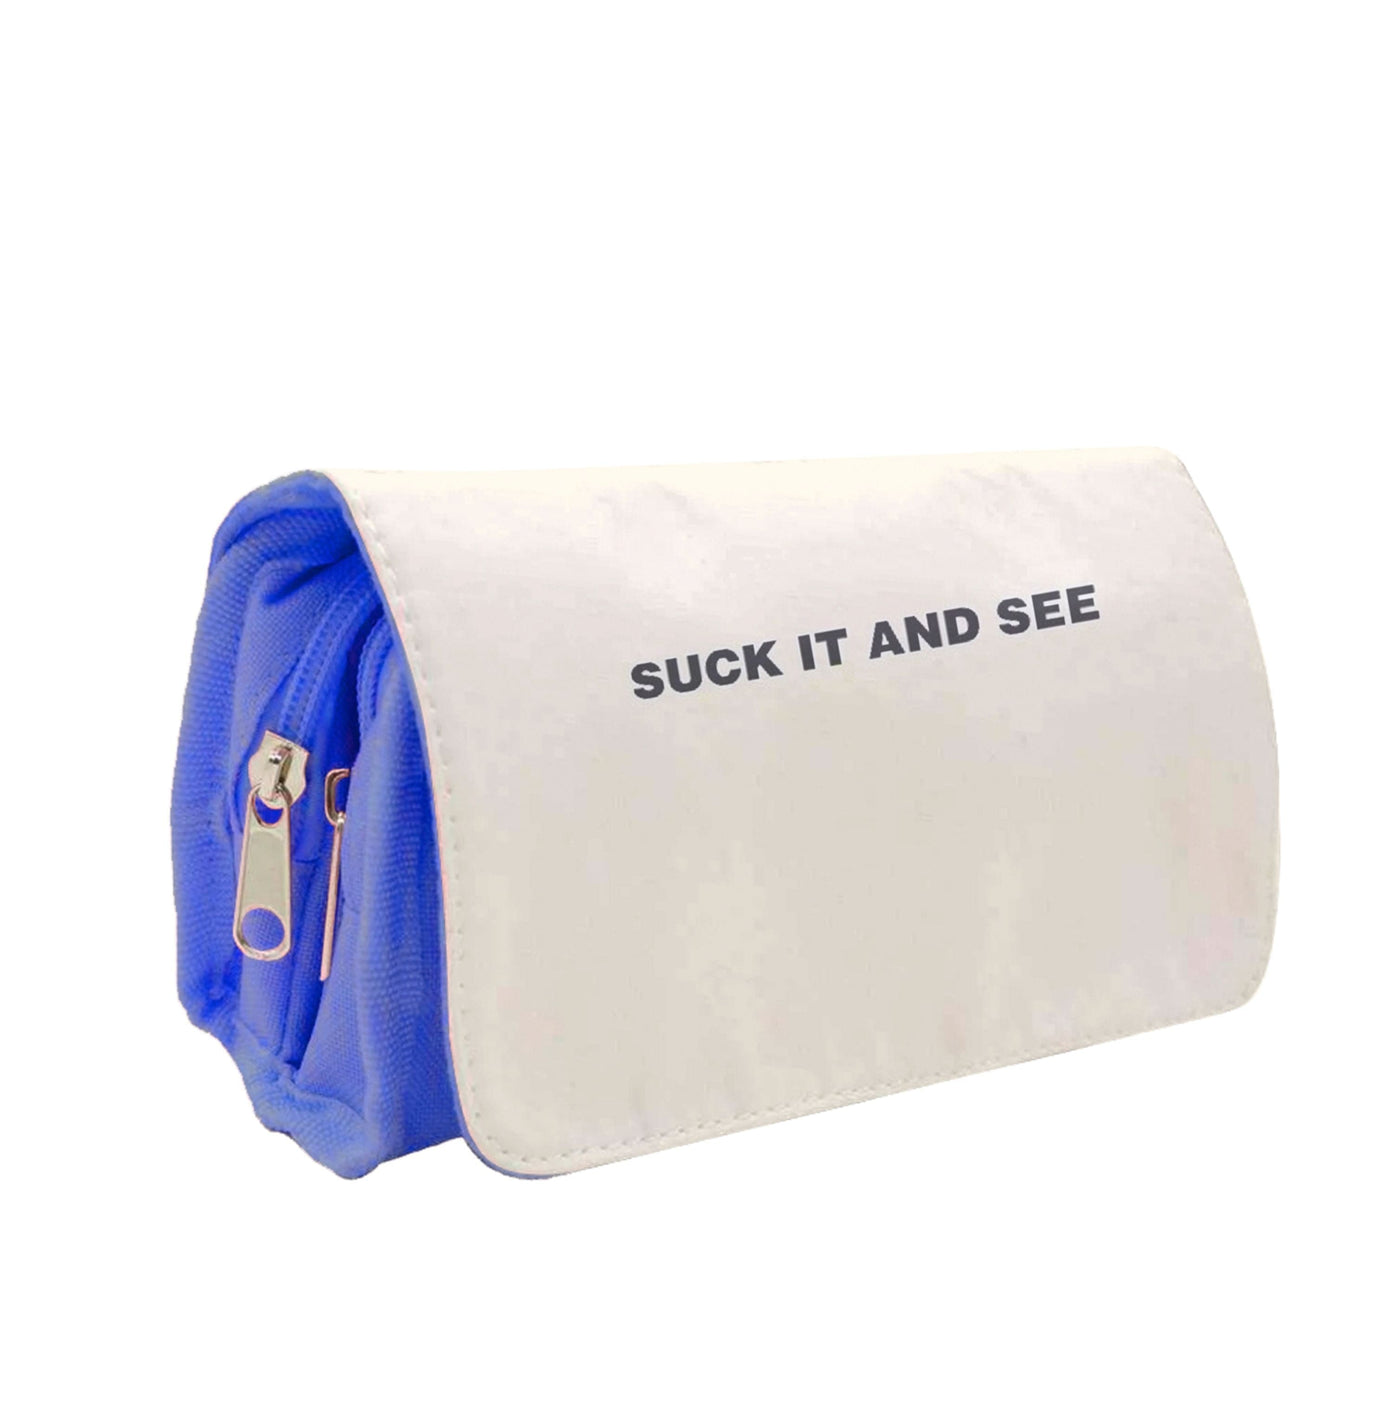 Suck It and See - Arctic Monkeys Pencil Case